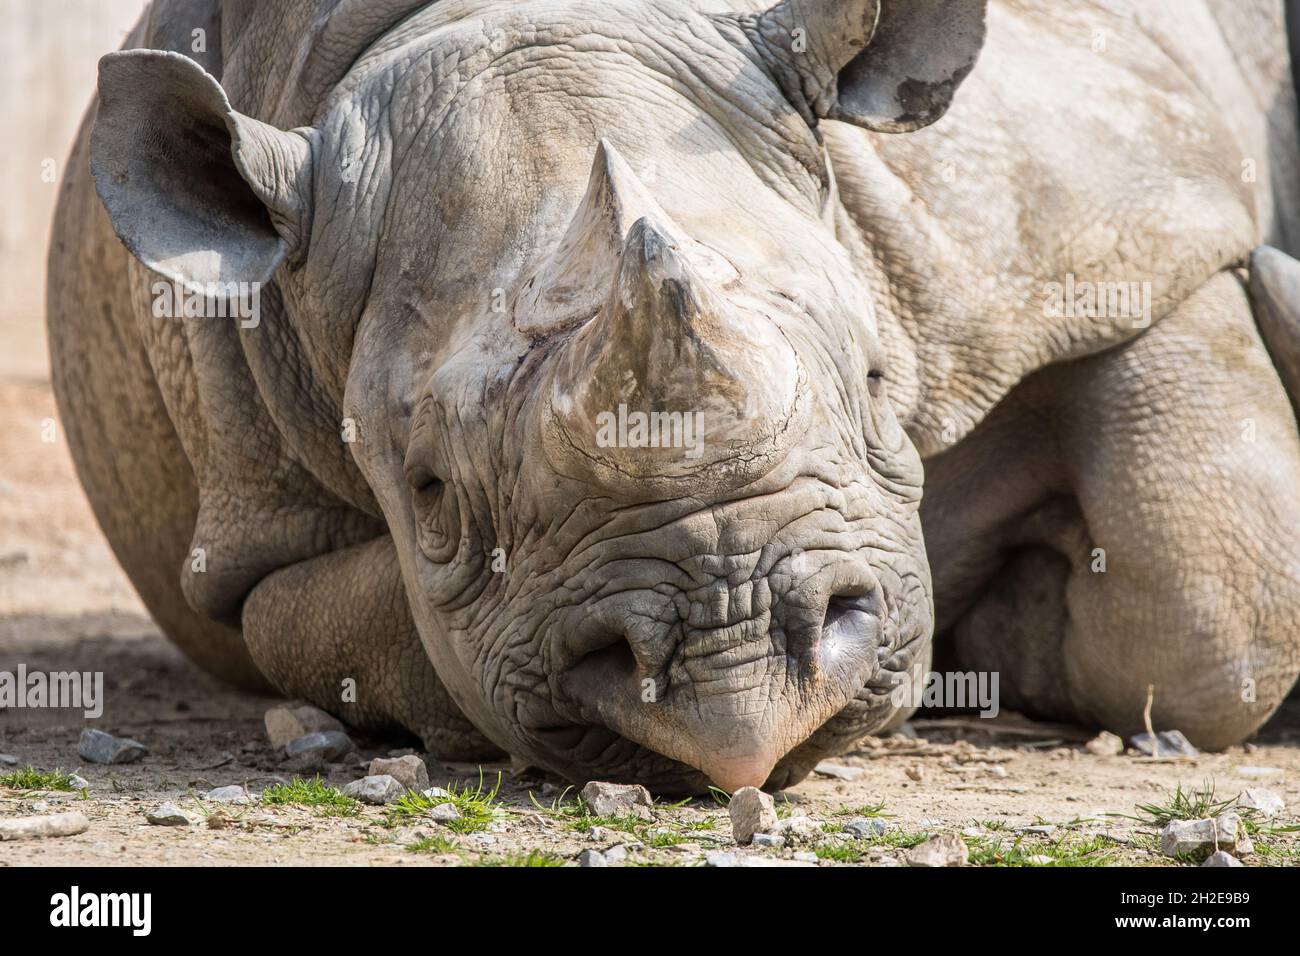 lazy looking rhinoceros laying on the ground Stock Photo